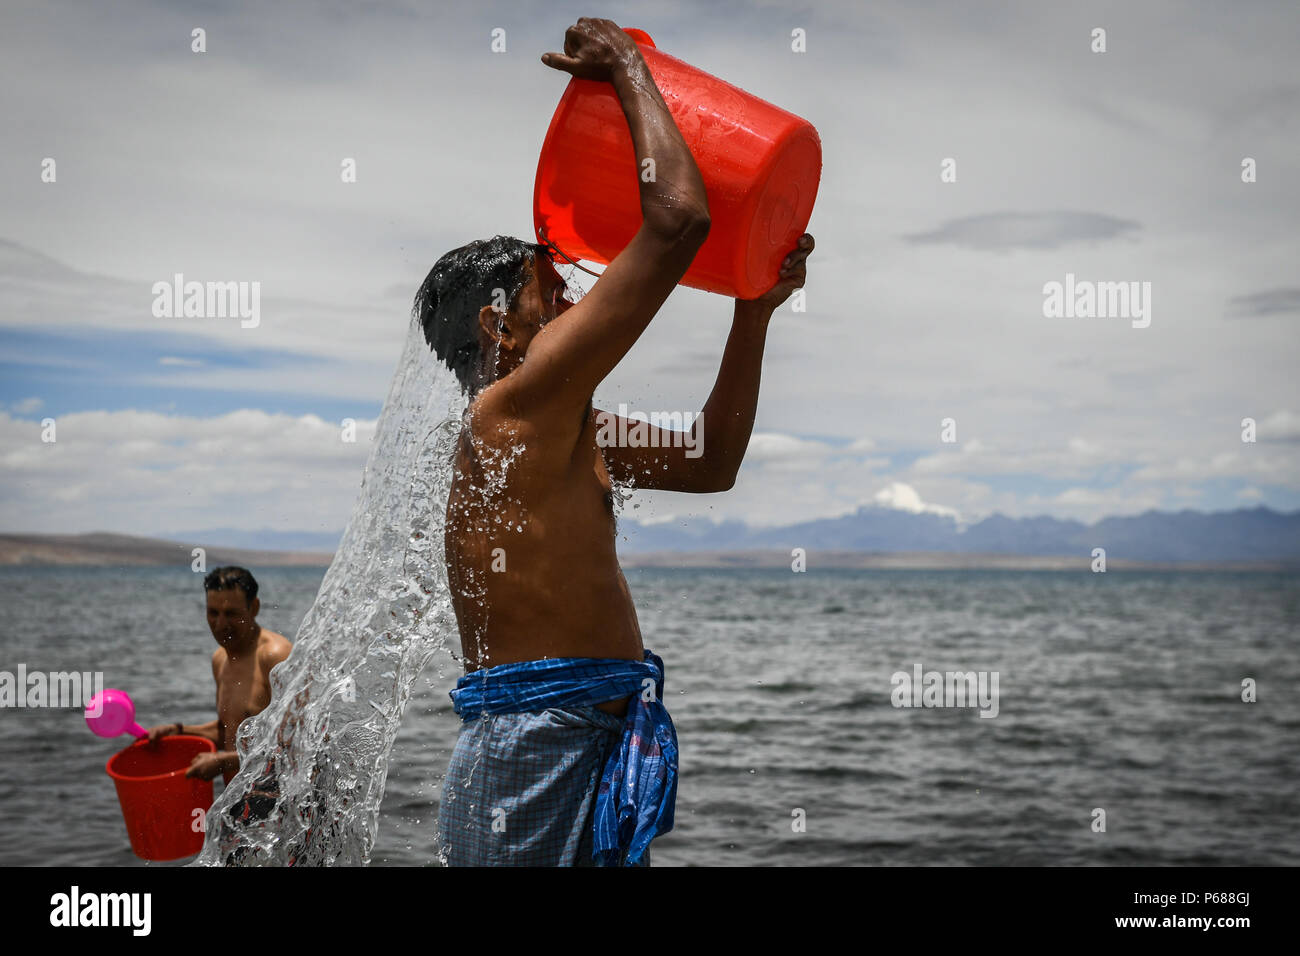 (180628) -- ALI, June 28, 2018 (Xinhua) -- Indian pilgrims take a bath at Mapam Yumco Lake, a sacred Hindu and Buddhist site, in Ali Prefecture, southwest China's Tibet Autonomous Region, June 26, 2018. This year, the Nathu La Pass is expected to see about 500 officially-organized pilgrims from India who will make the 2,874-km pilgrimage, according to Yang Zhigang, deputy director of the office of foreign affairs and overseas Chinese affairs in Xigaze City.  (Xinhua/Liu Dongjun)(mcg) Stock Photo